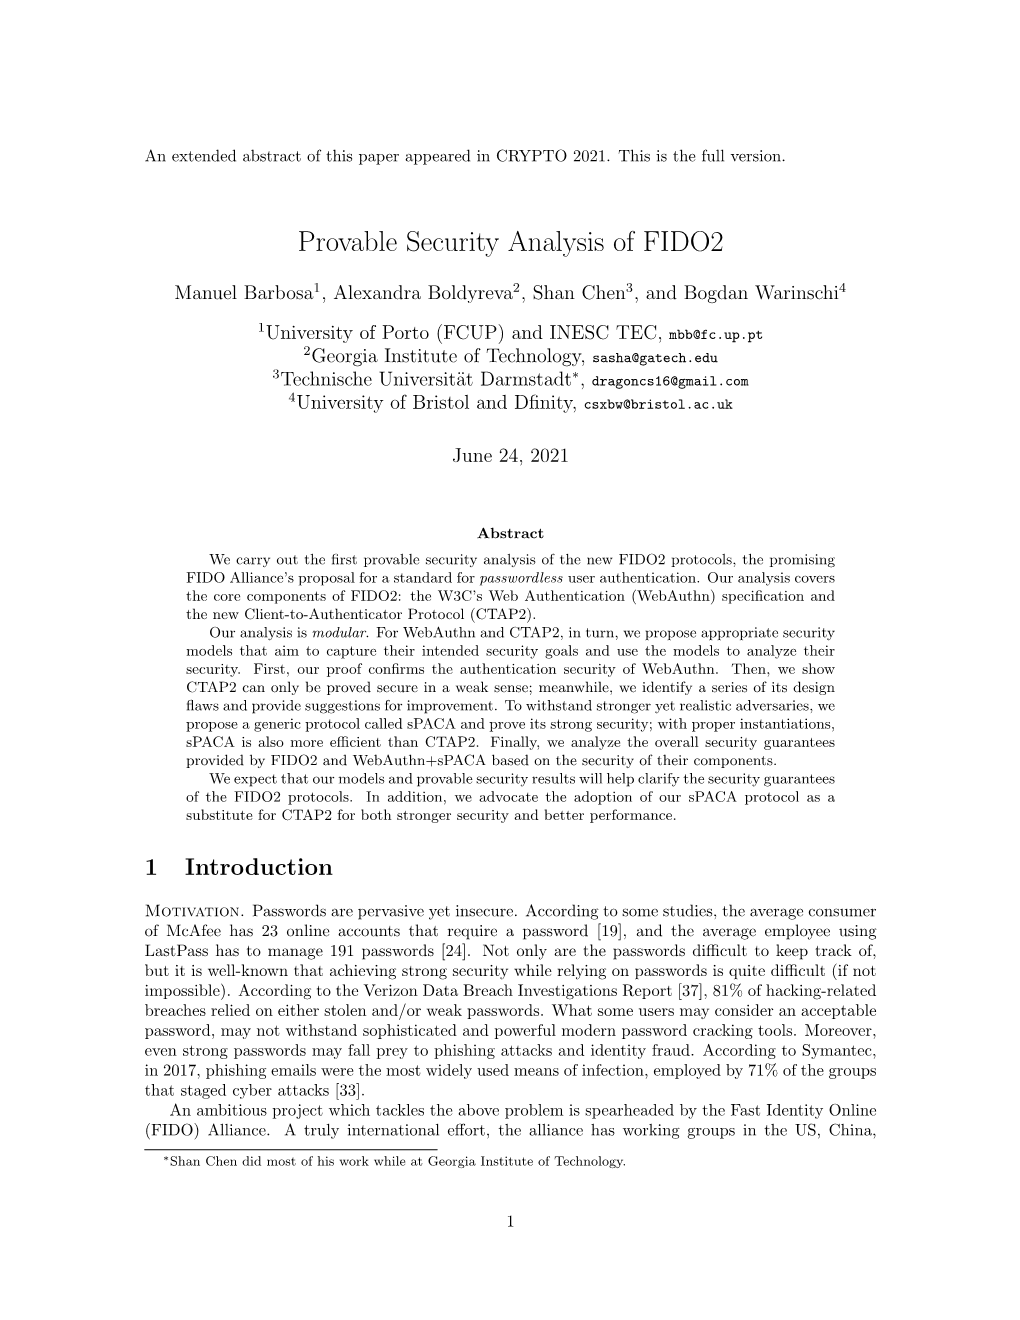 Provable Security Analysis of FIDO2